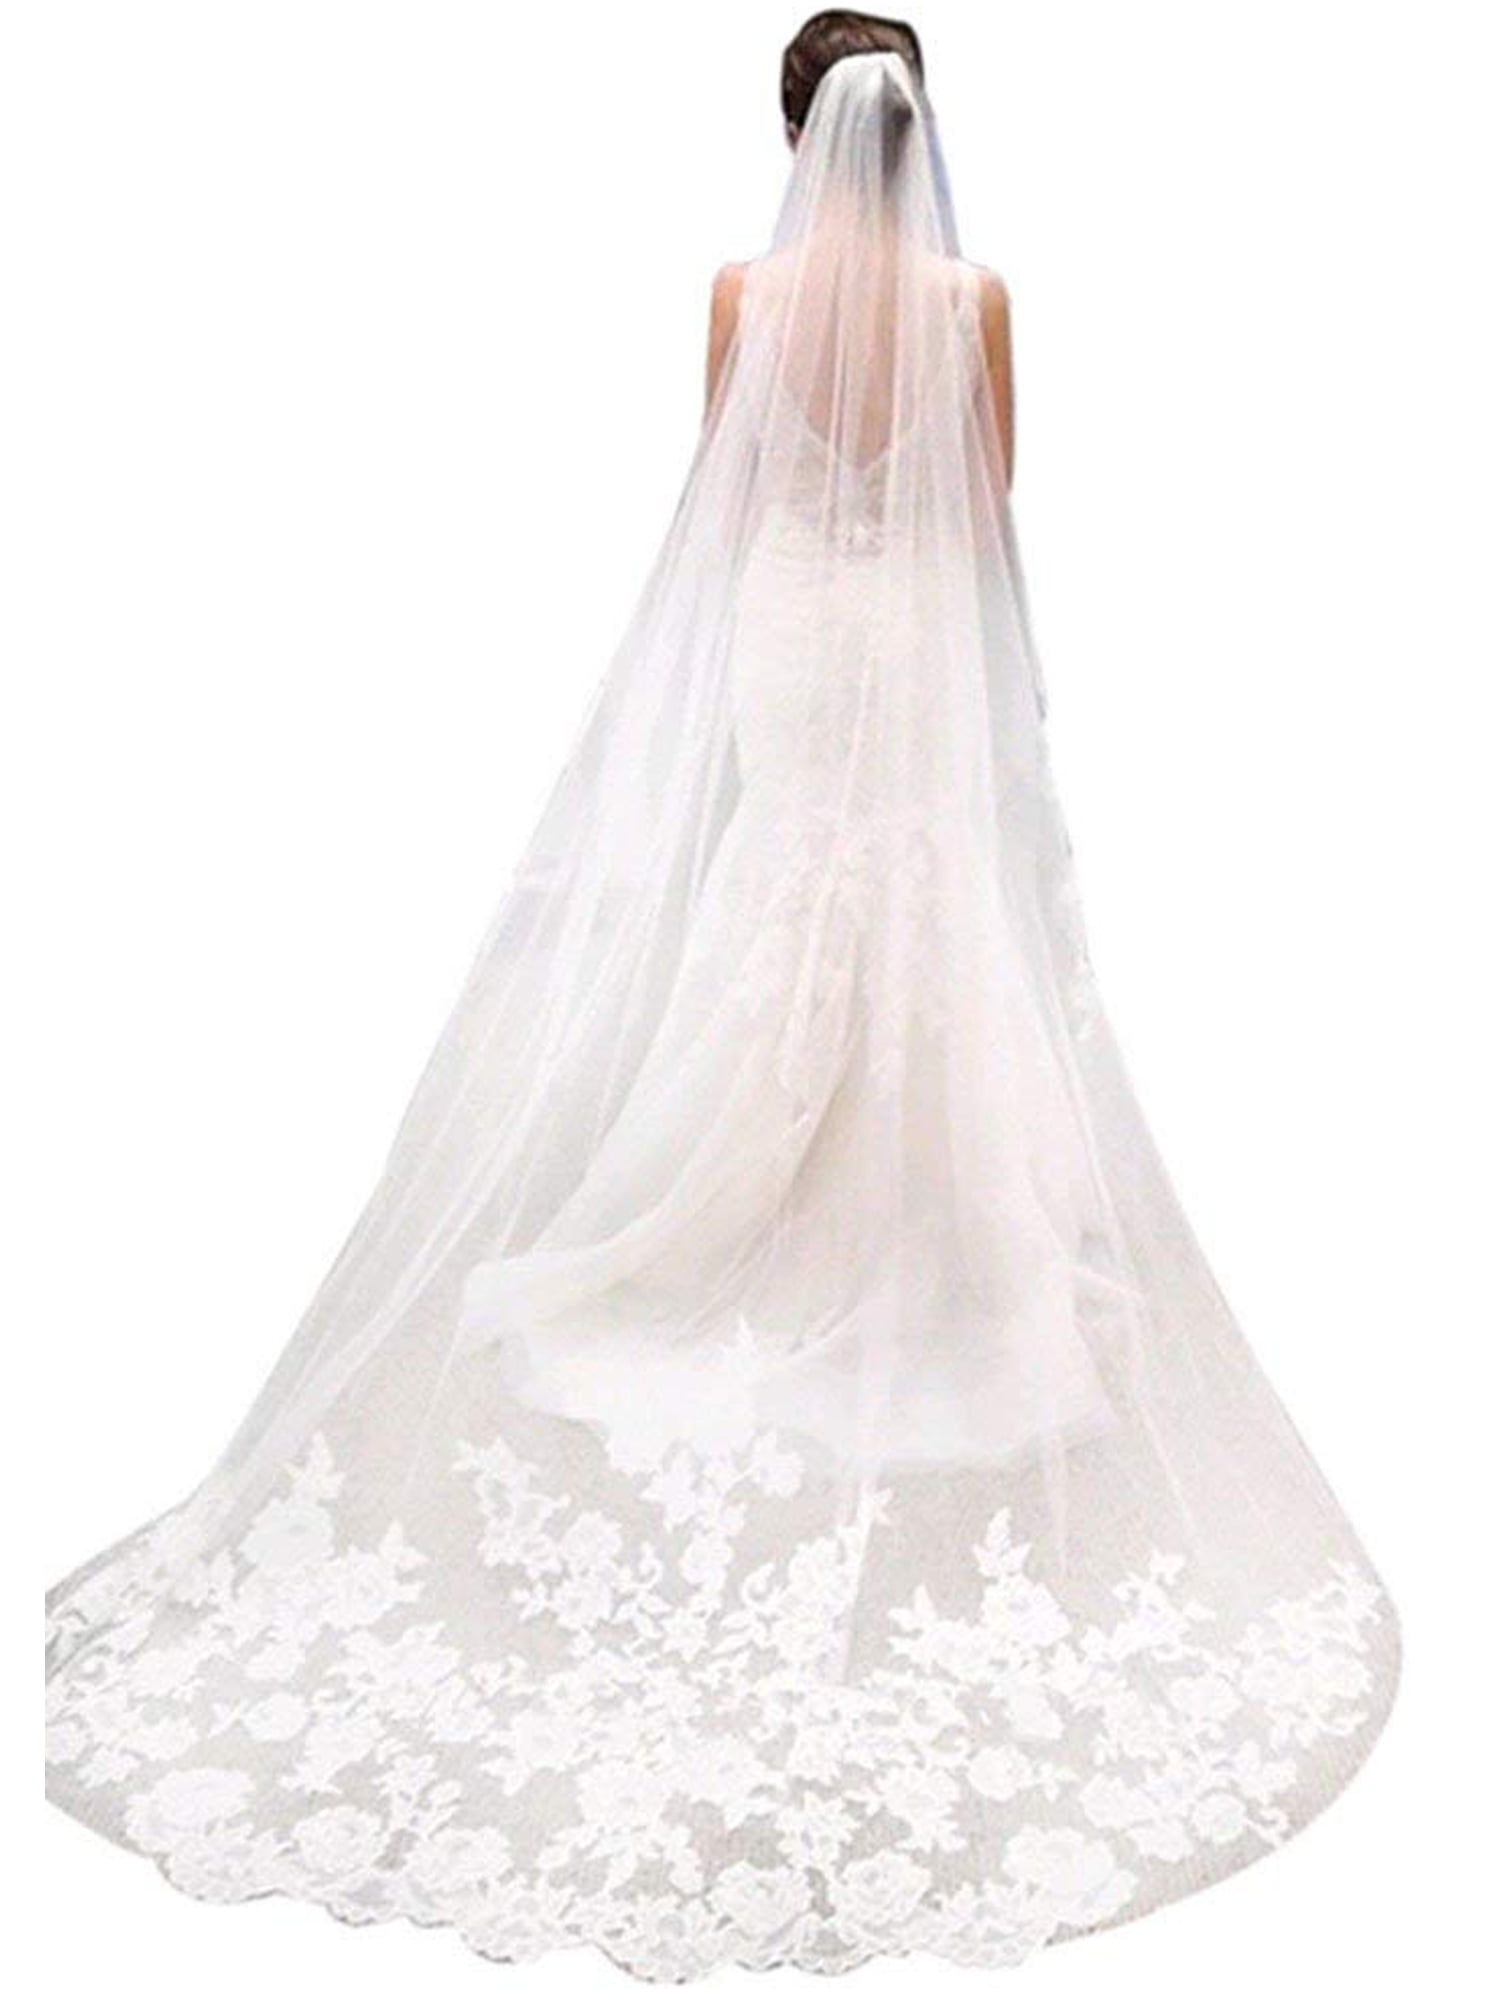 Layers Wedding Bridal Veil Lace White/Ivory Long Birdcag Edge Bride with comb 